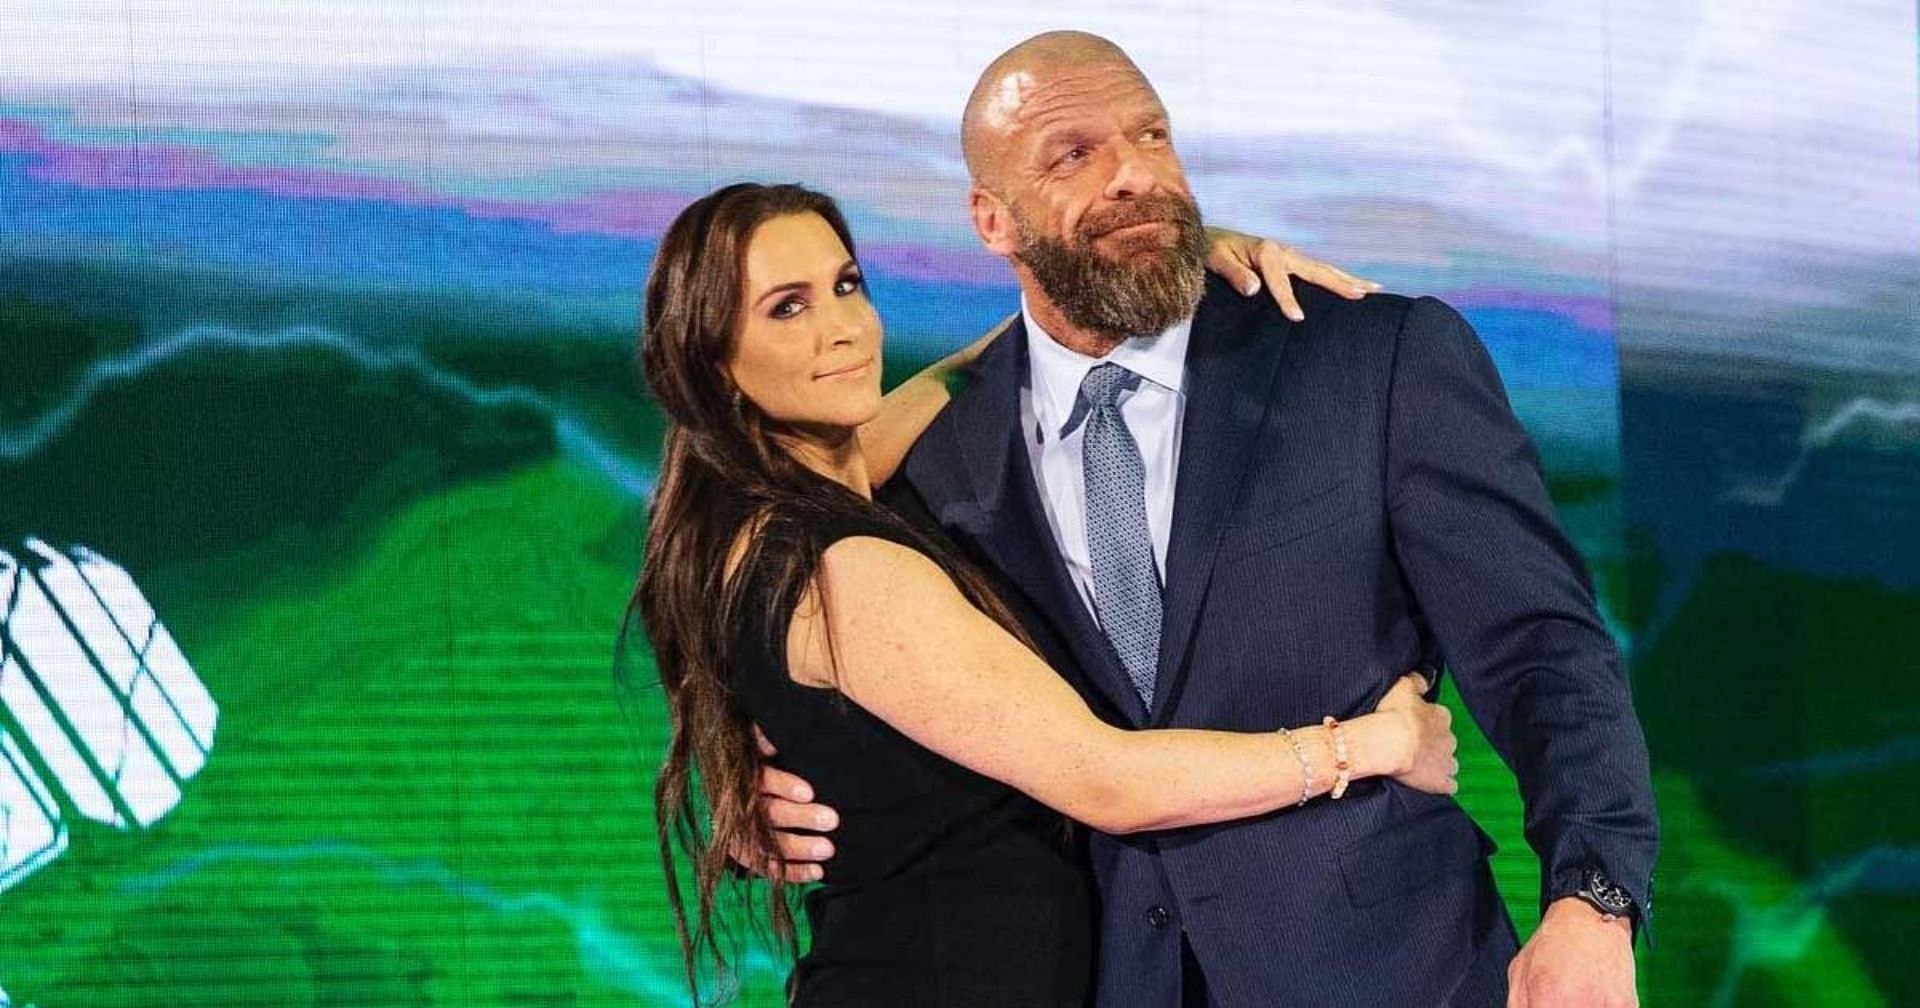 Triple H and Stephanie McMahon now oversee WWE